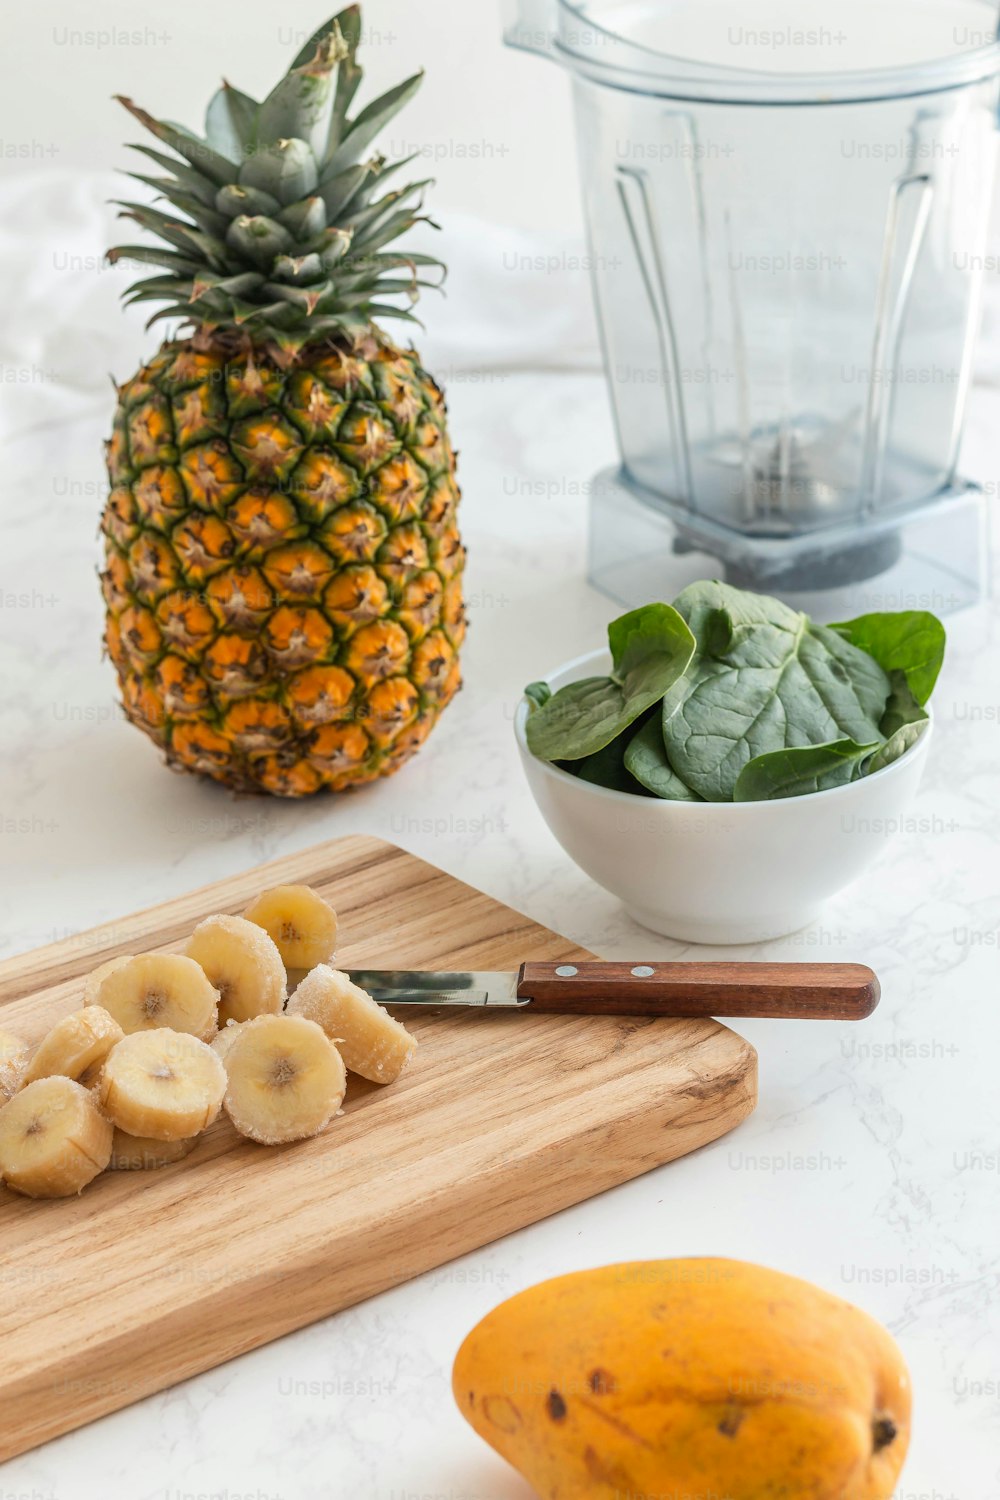 a pineapple and bananas on a cutting board next to a blender